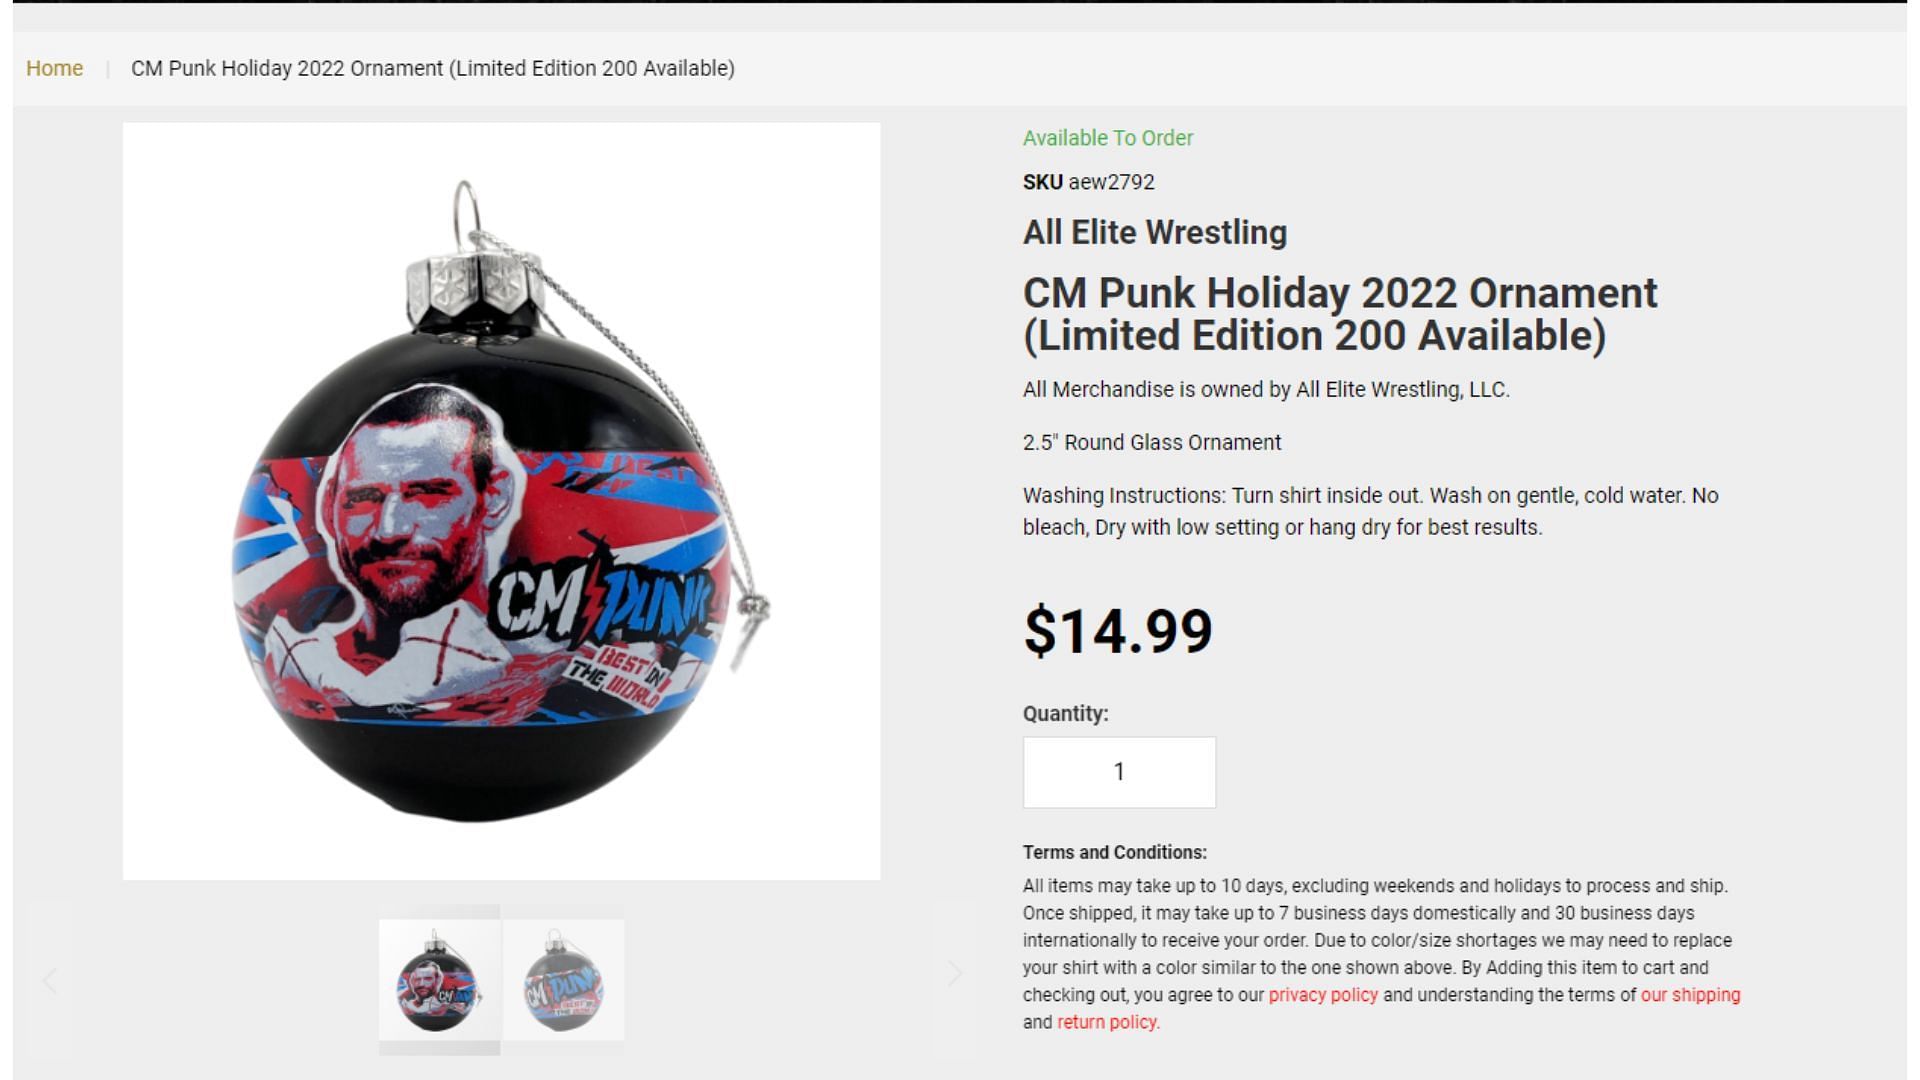 The official listing for the Limited Edition CM Punk Holiday 2022 Ornament.